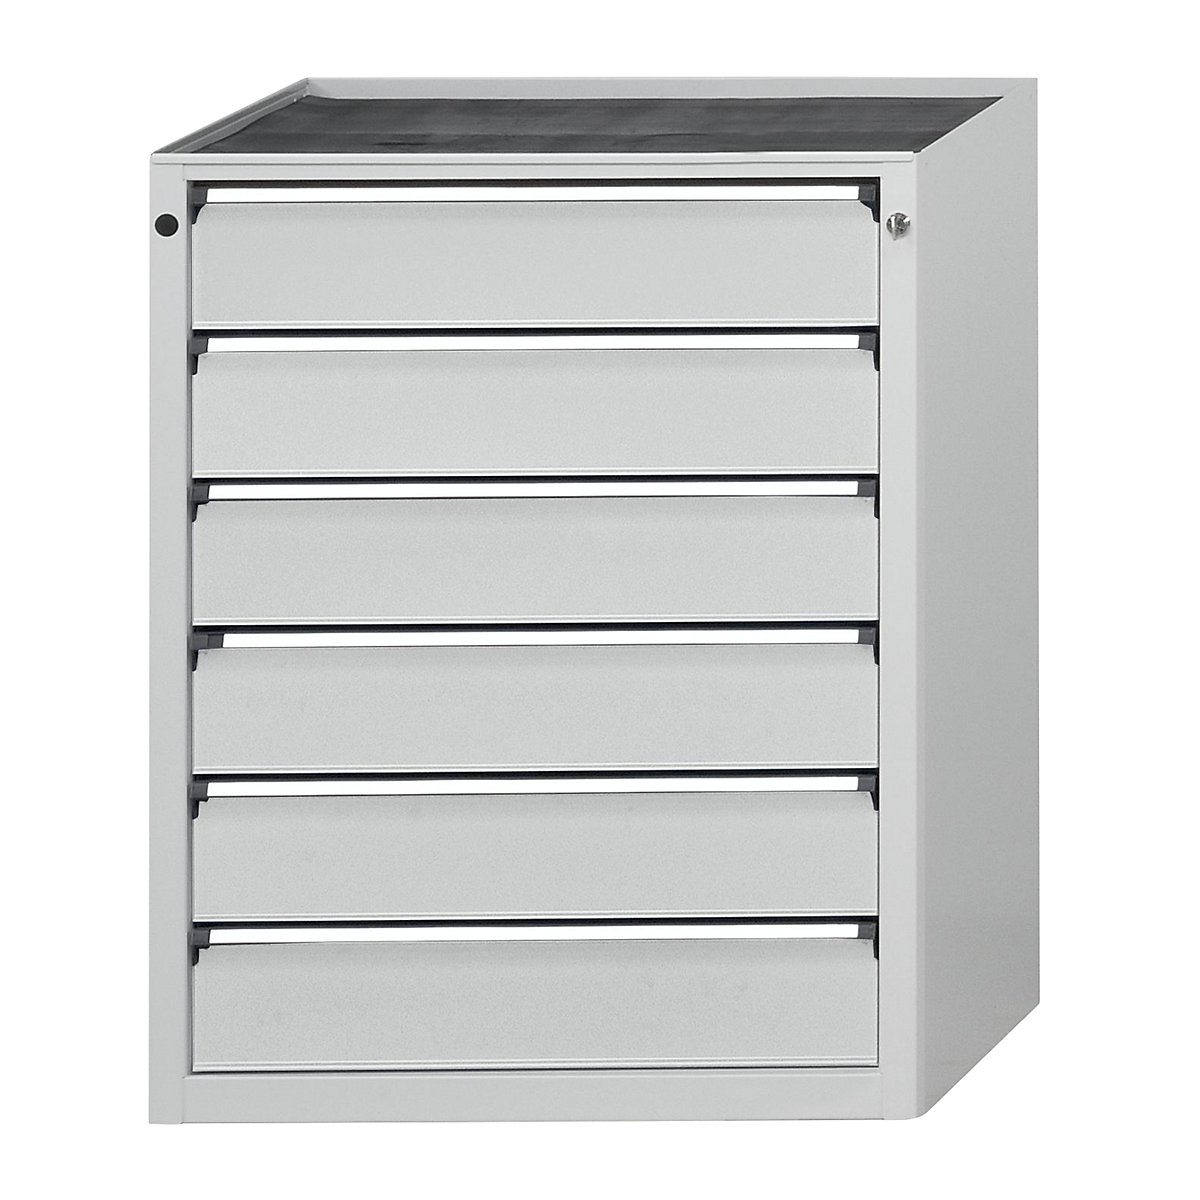 Drawer cupboard without worktop – ANKE, width 910 mm, 6 x 150 mm drawers, front in light grey-2